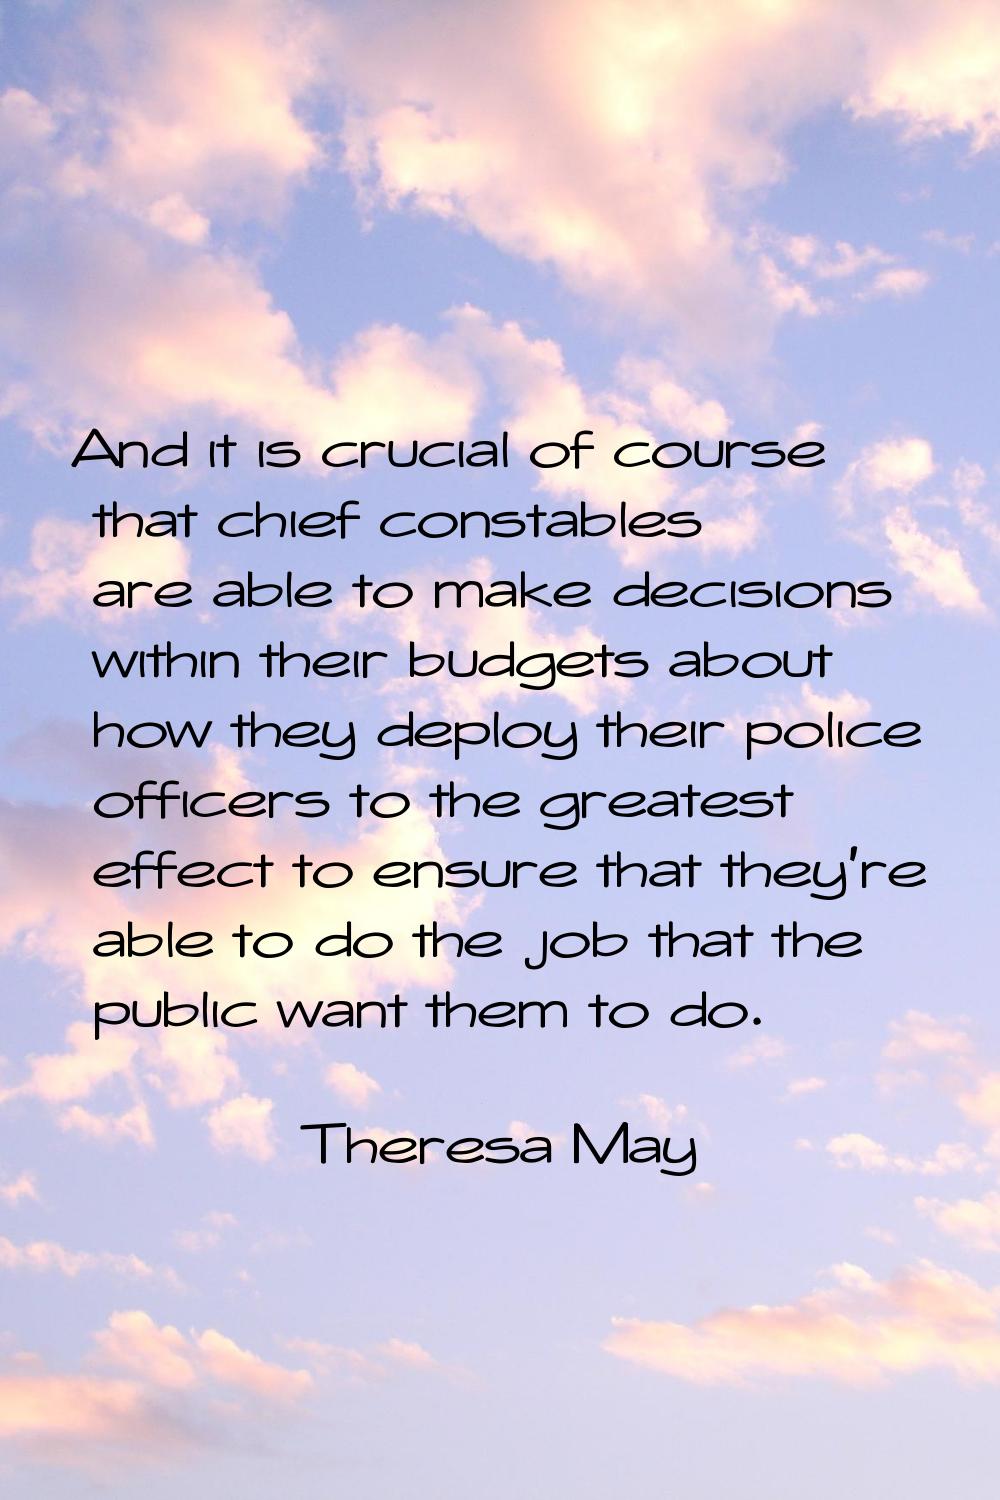 And it is crucial of course that chief constables are able to make decisions within their budgets a